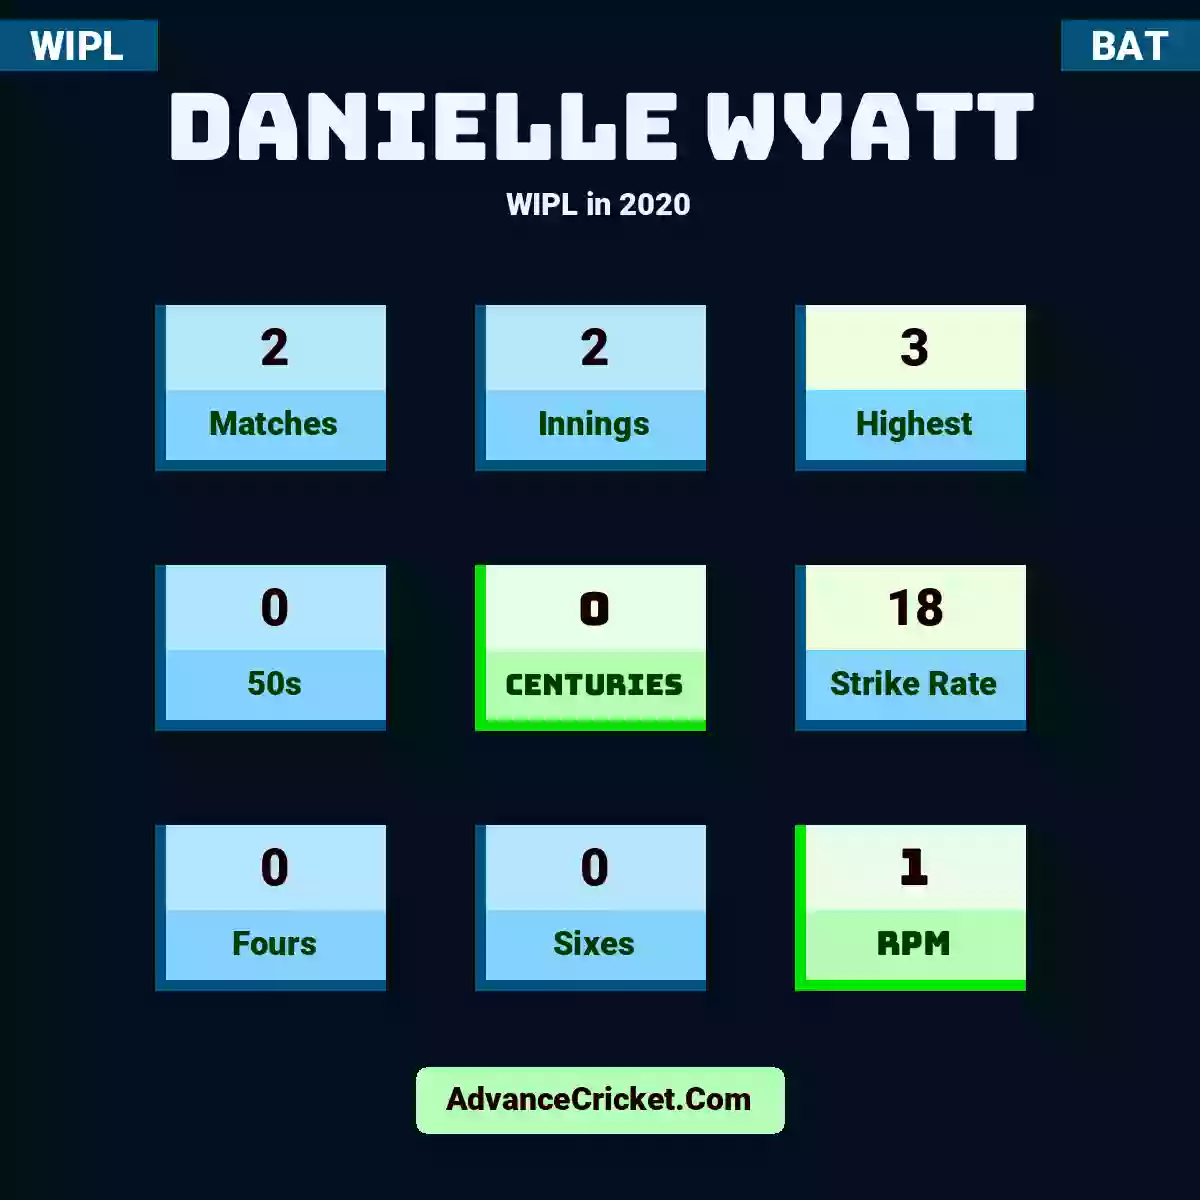 Danielle Wyatt WIPL  in 2020, Danielle Wyatt played 2 matches, scored 3 runs as highest, 0 half-centuries, and 0 centuries, with a strike rate of 18. D.Wyatt hit 0 fours and 0 sixes, with an RPM of 1.